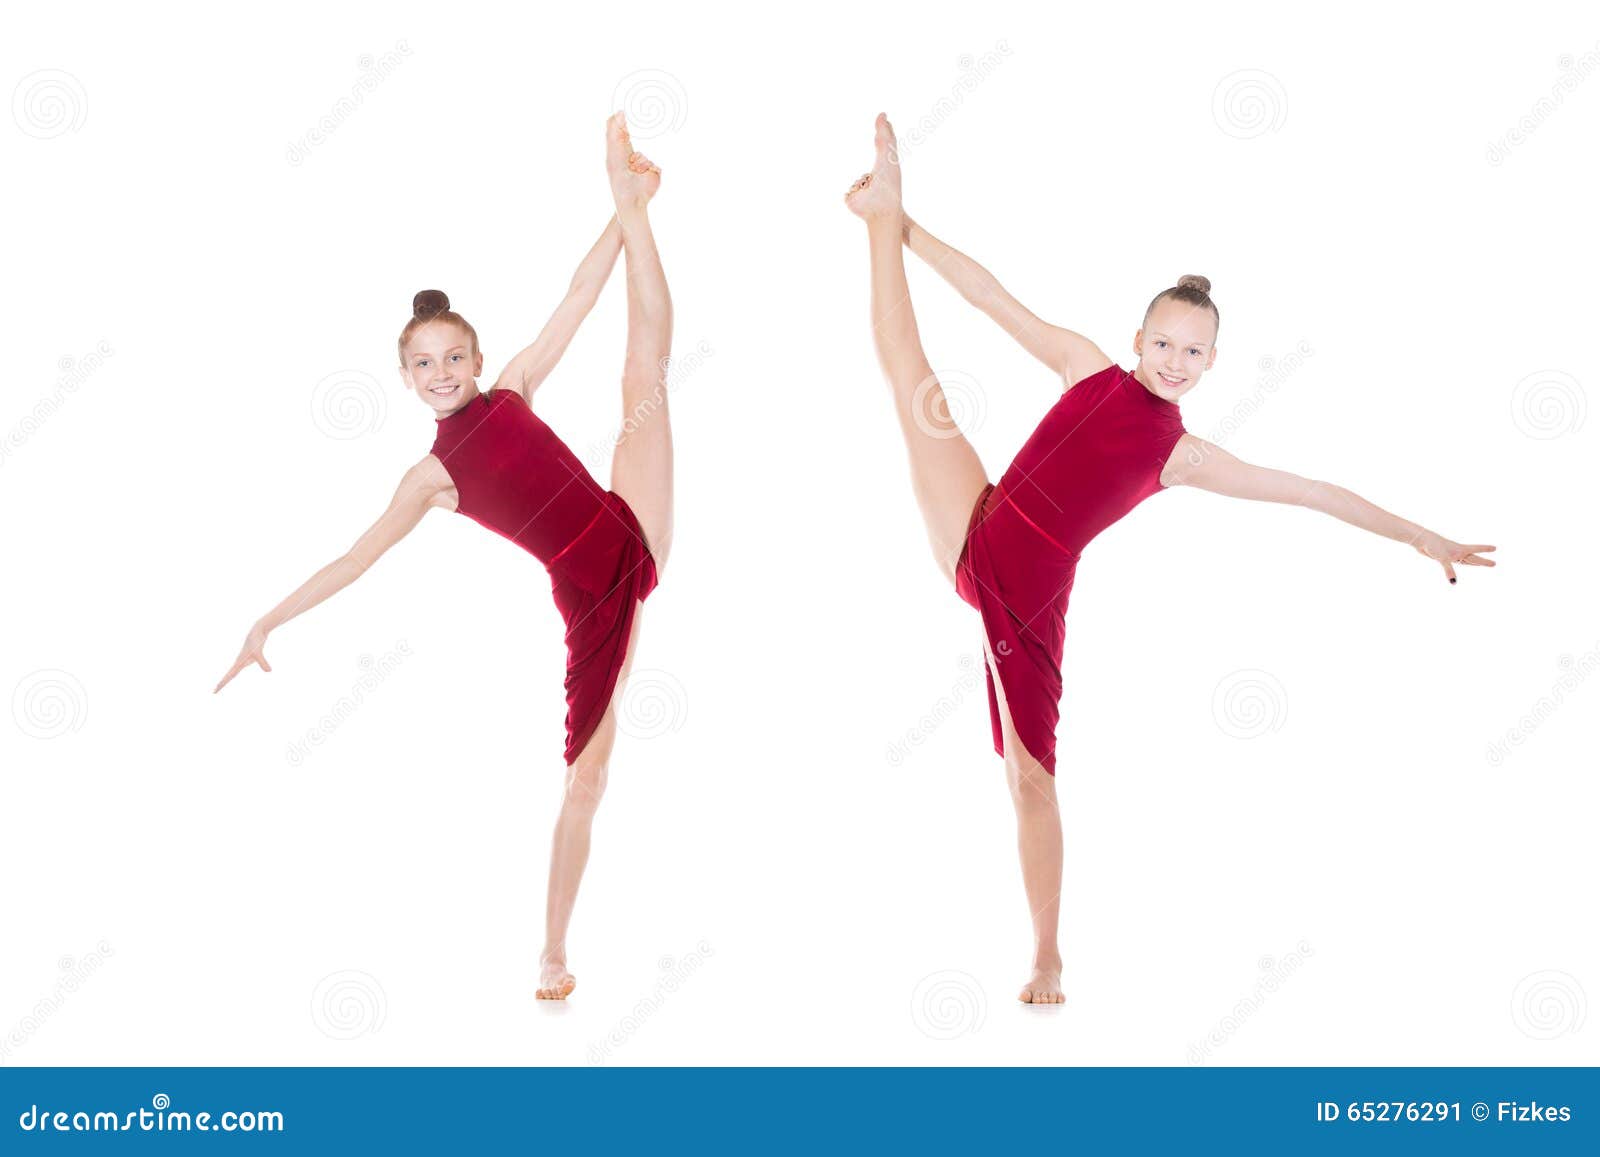 Figure drawing pose of female action dancing standing and hands empty   Figurosity